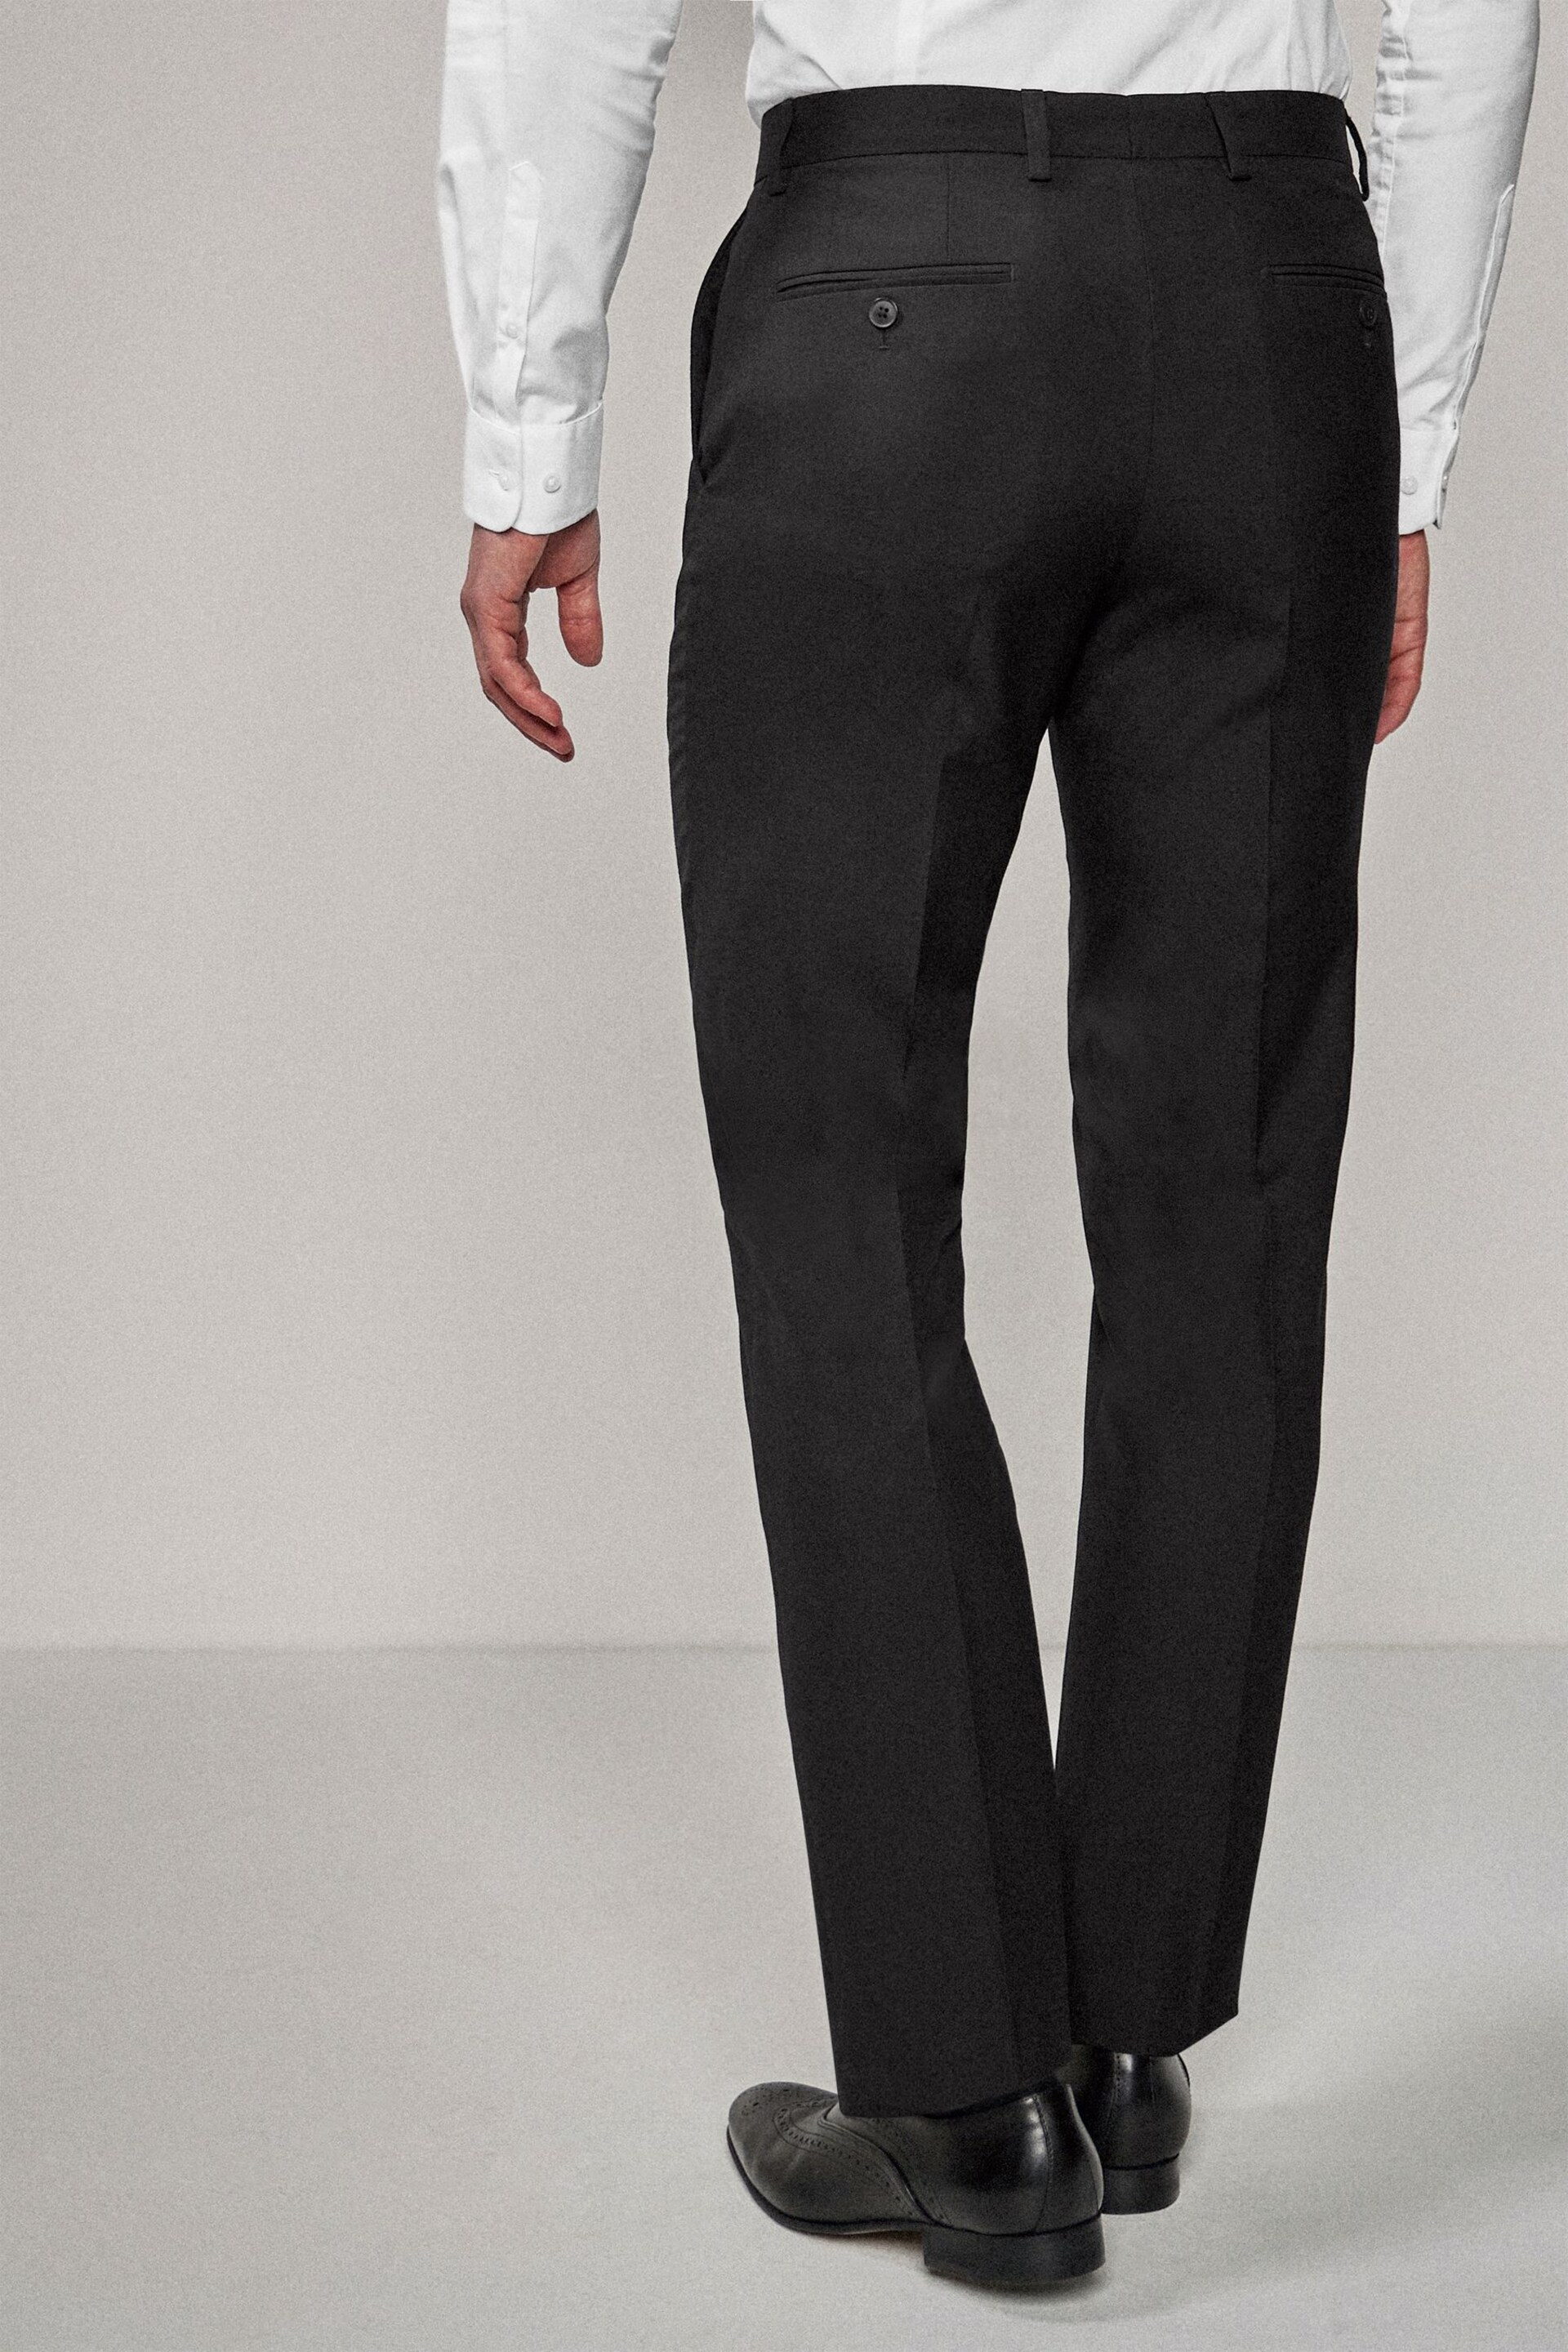 Black Tailored Suit Trousers - Image 3 of 8